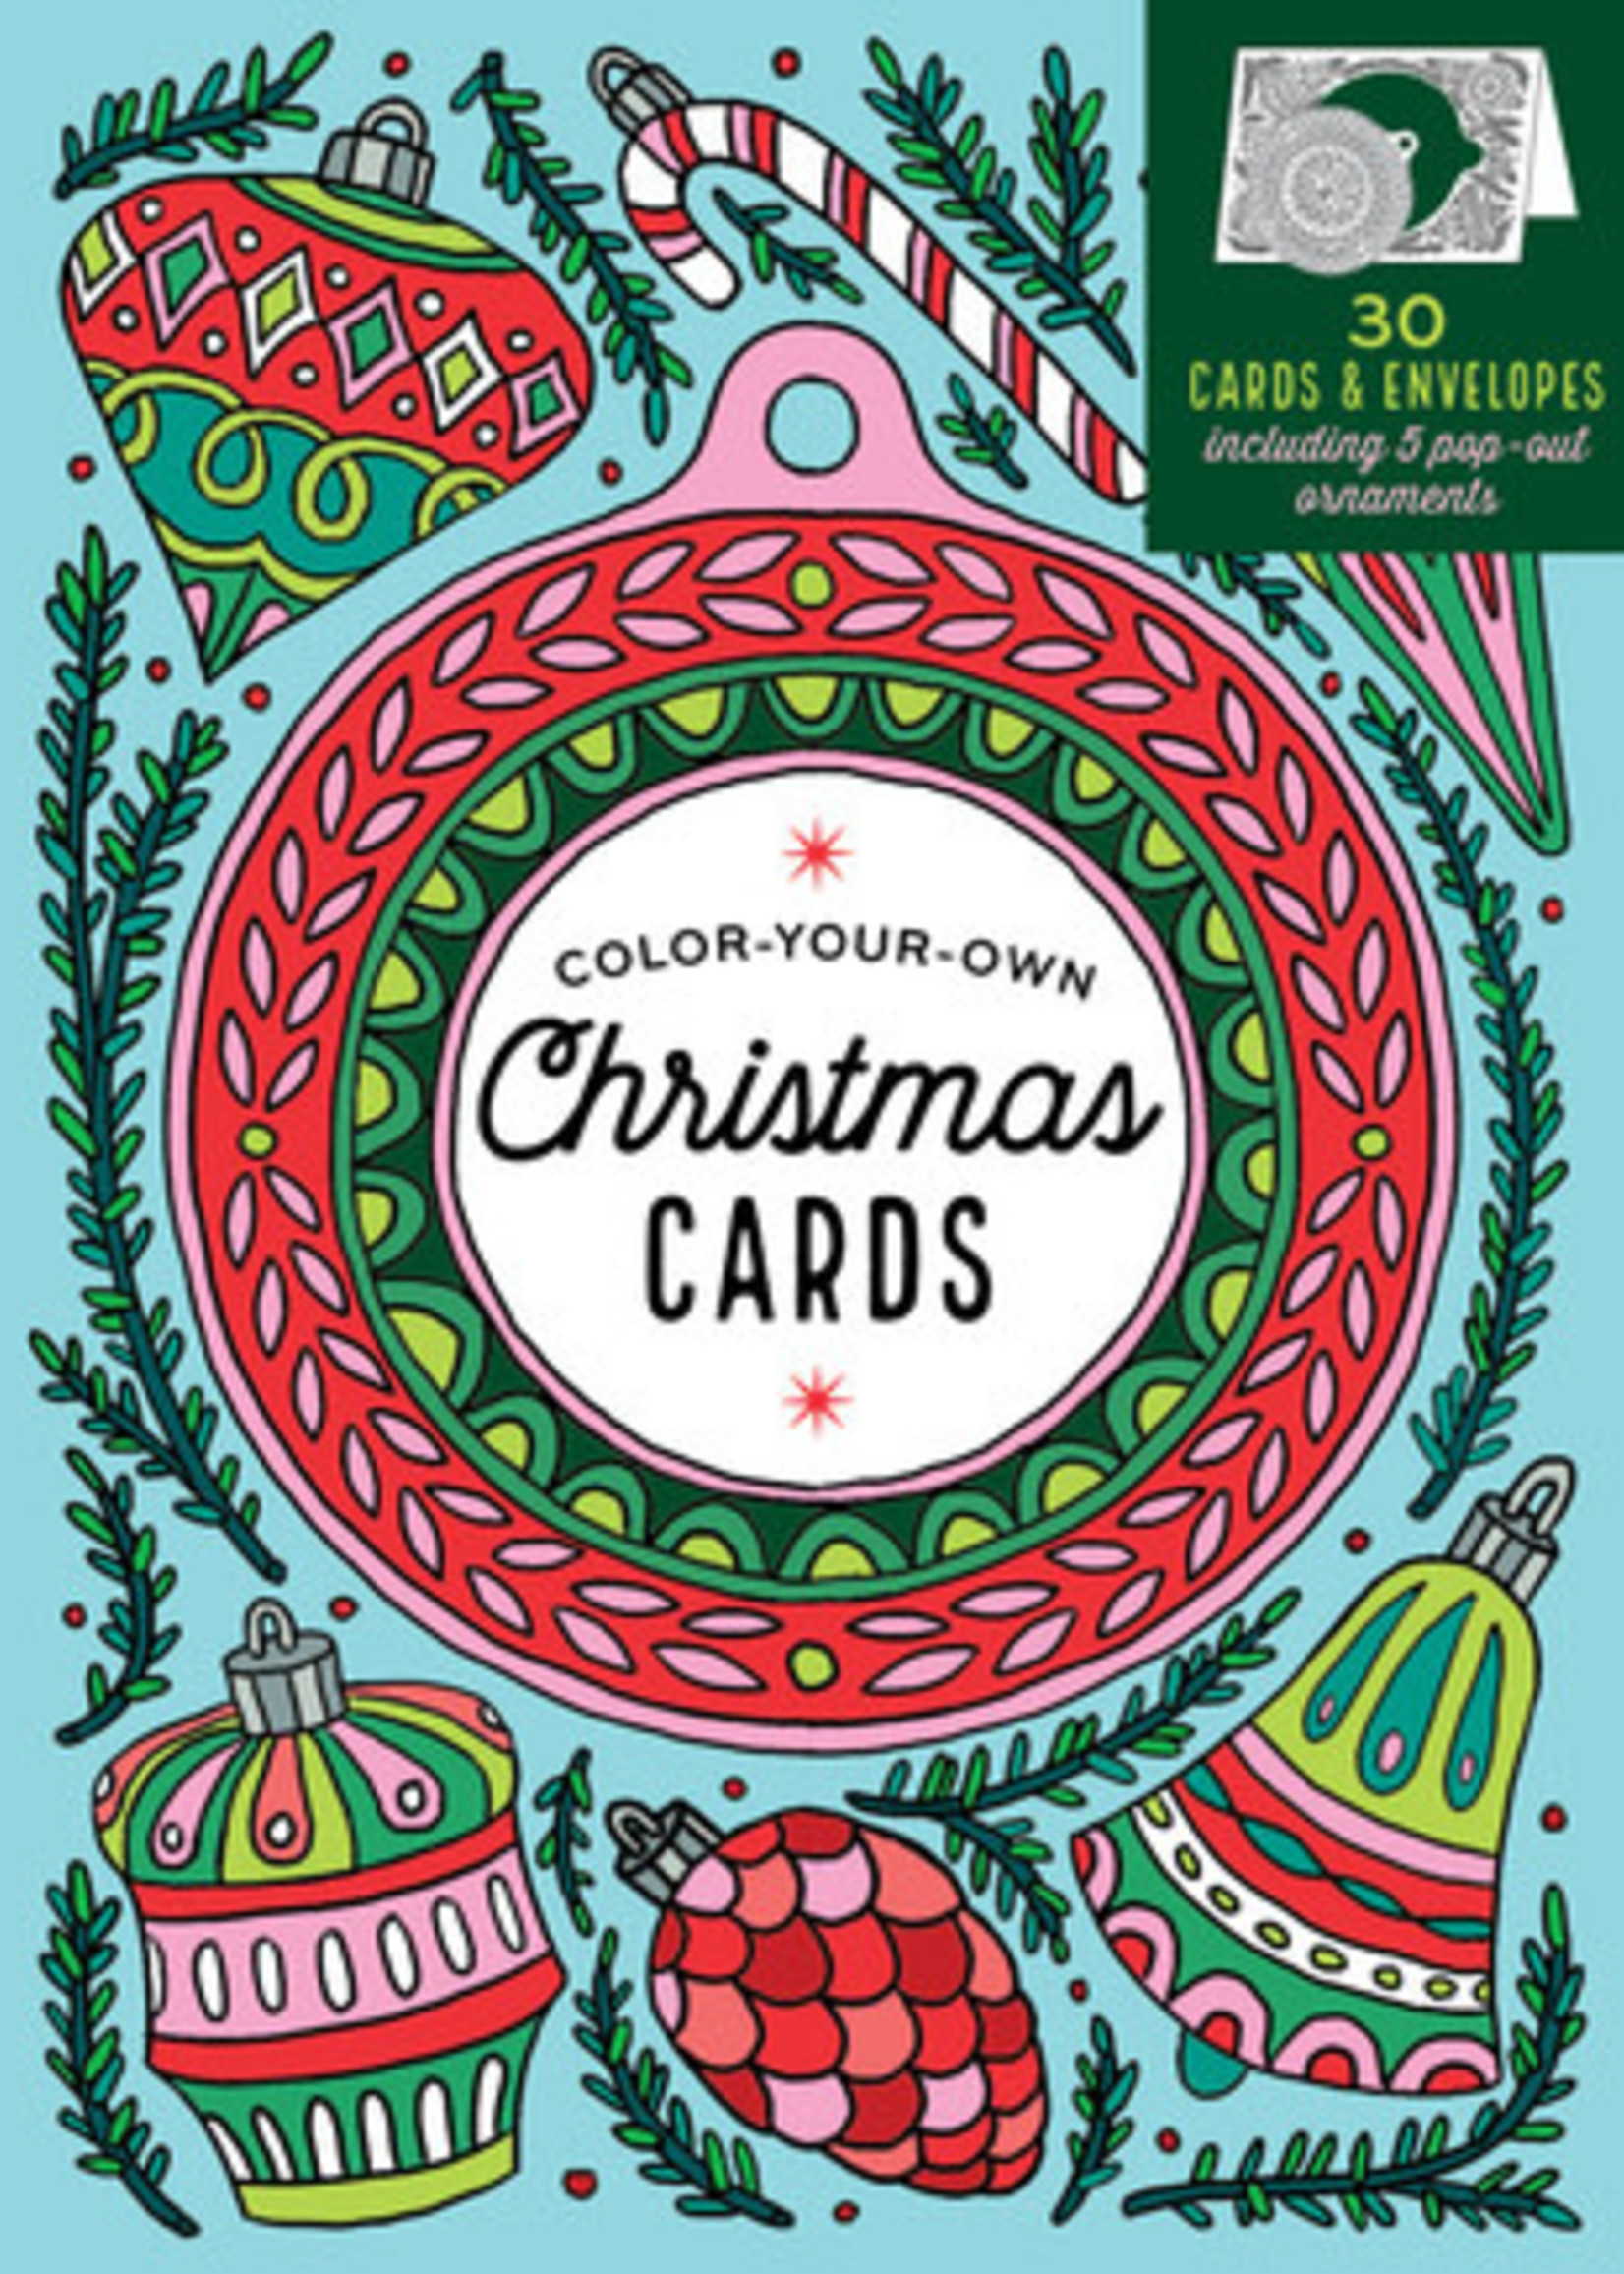 Create-Your-Own Handmade Christmas Cards: 30 Cards Envelopes to Color, Including 5 Pop-Out Ornaments by Caitlin Keegan